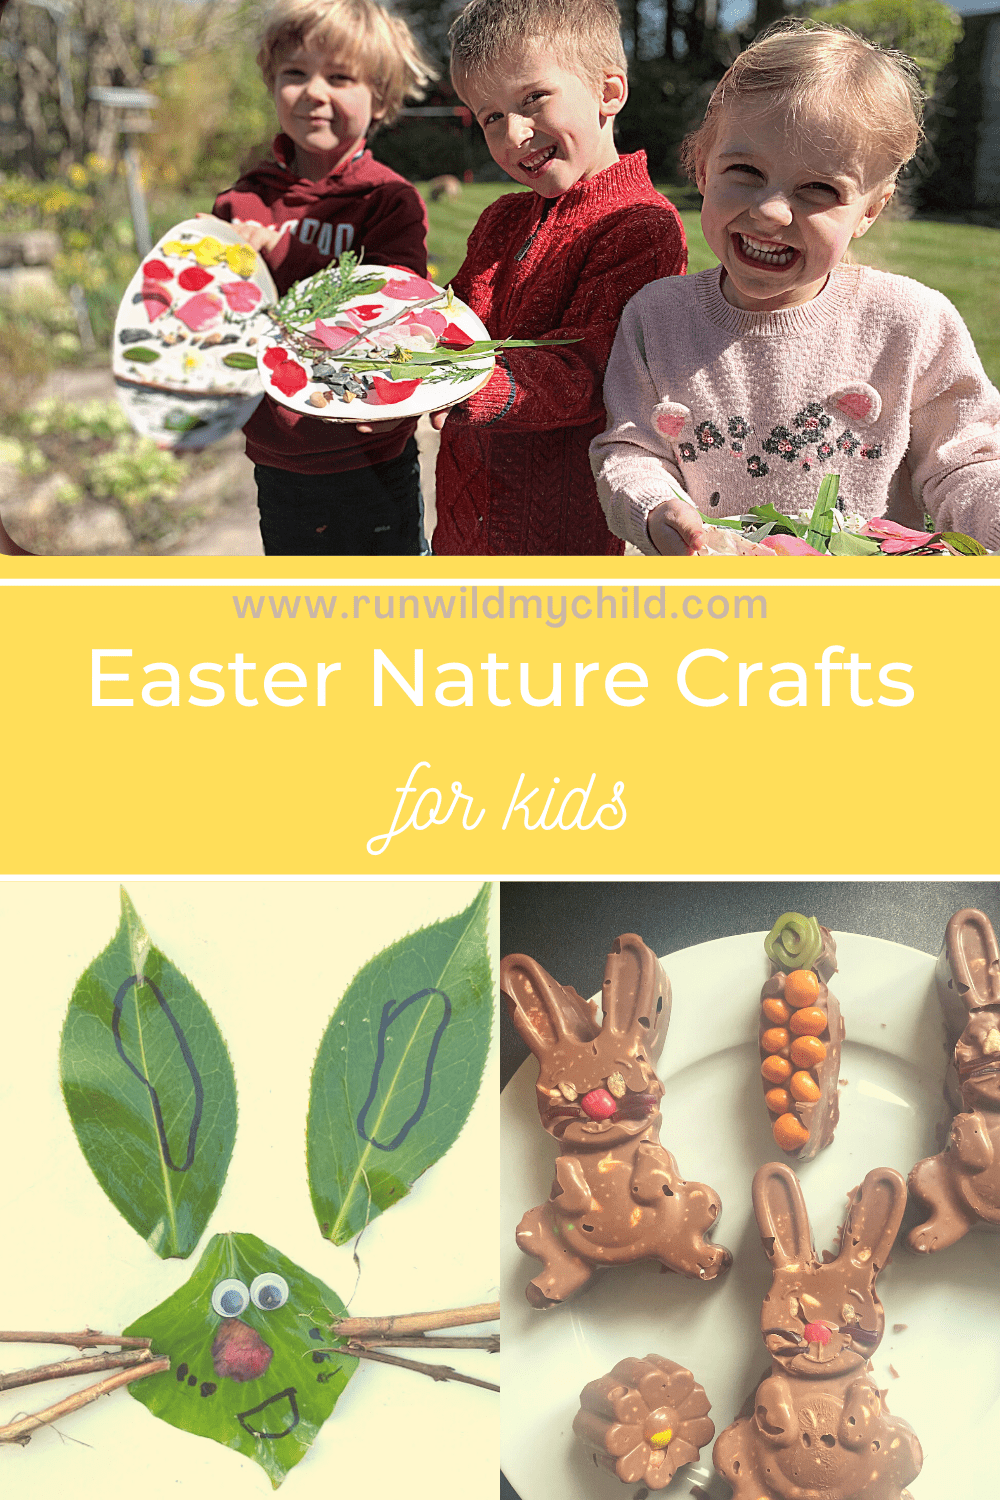 Looking for Outdoor Easter Decorations? - MY 100 YEAR OLD HOME